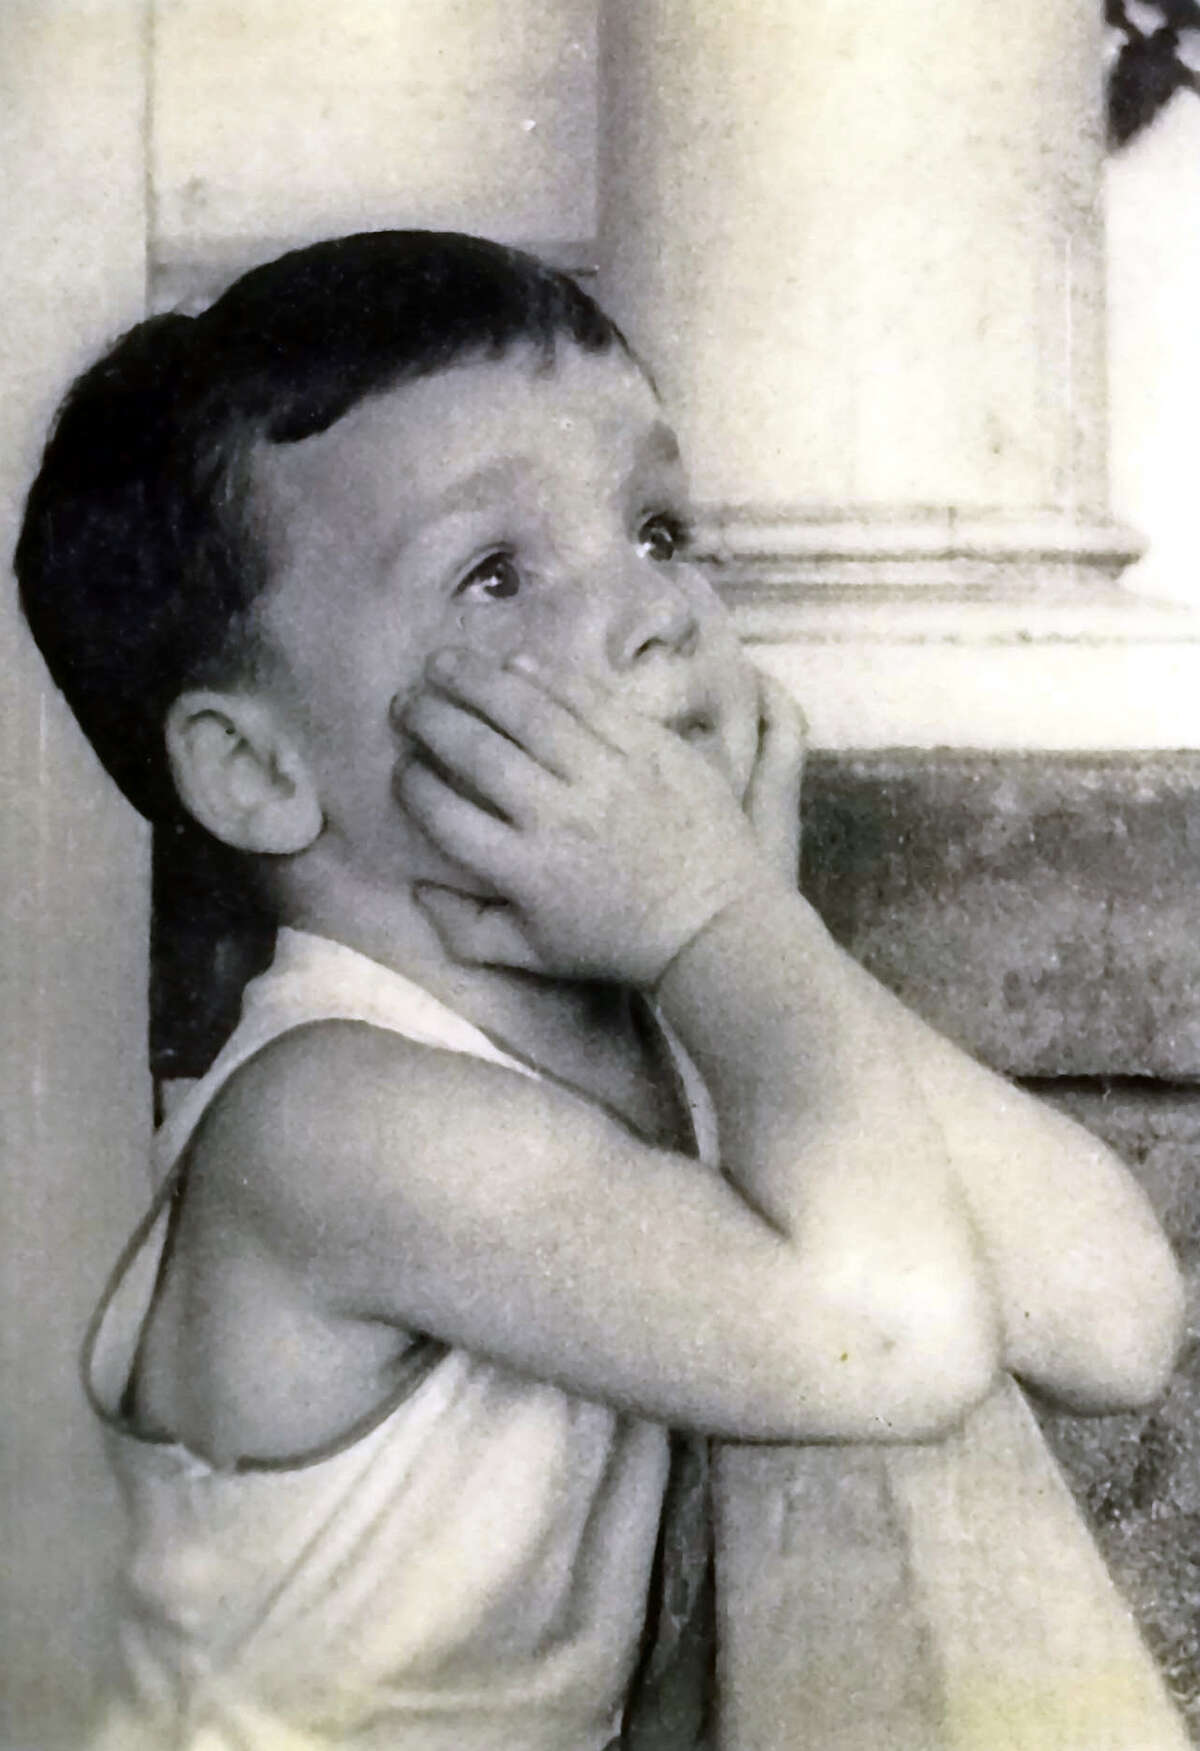 Bradshaw as a child in the 1930s. He acknowledged being born into a troubled family.